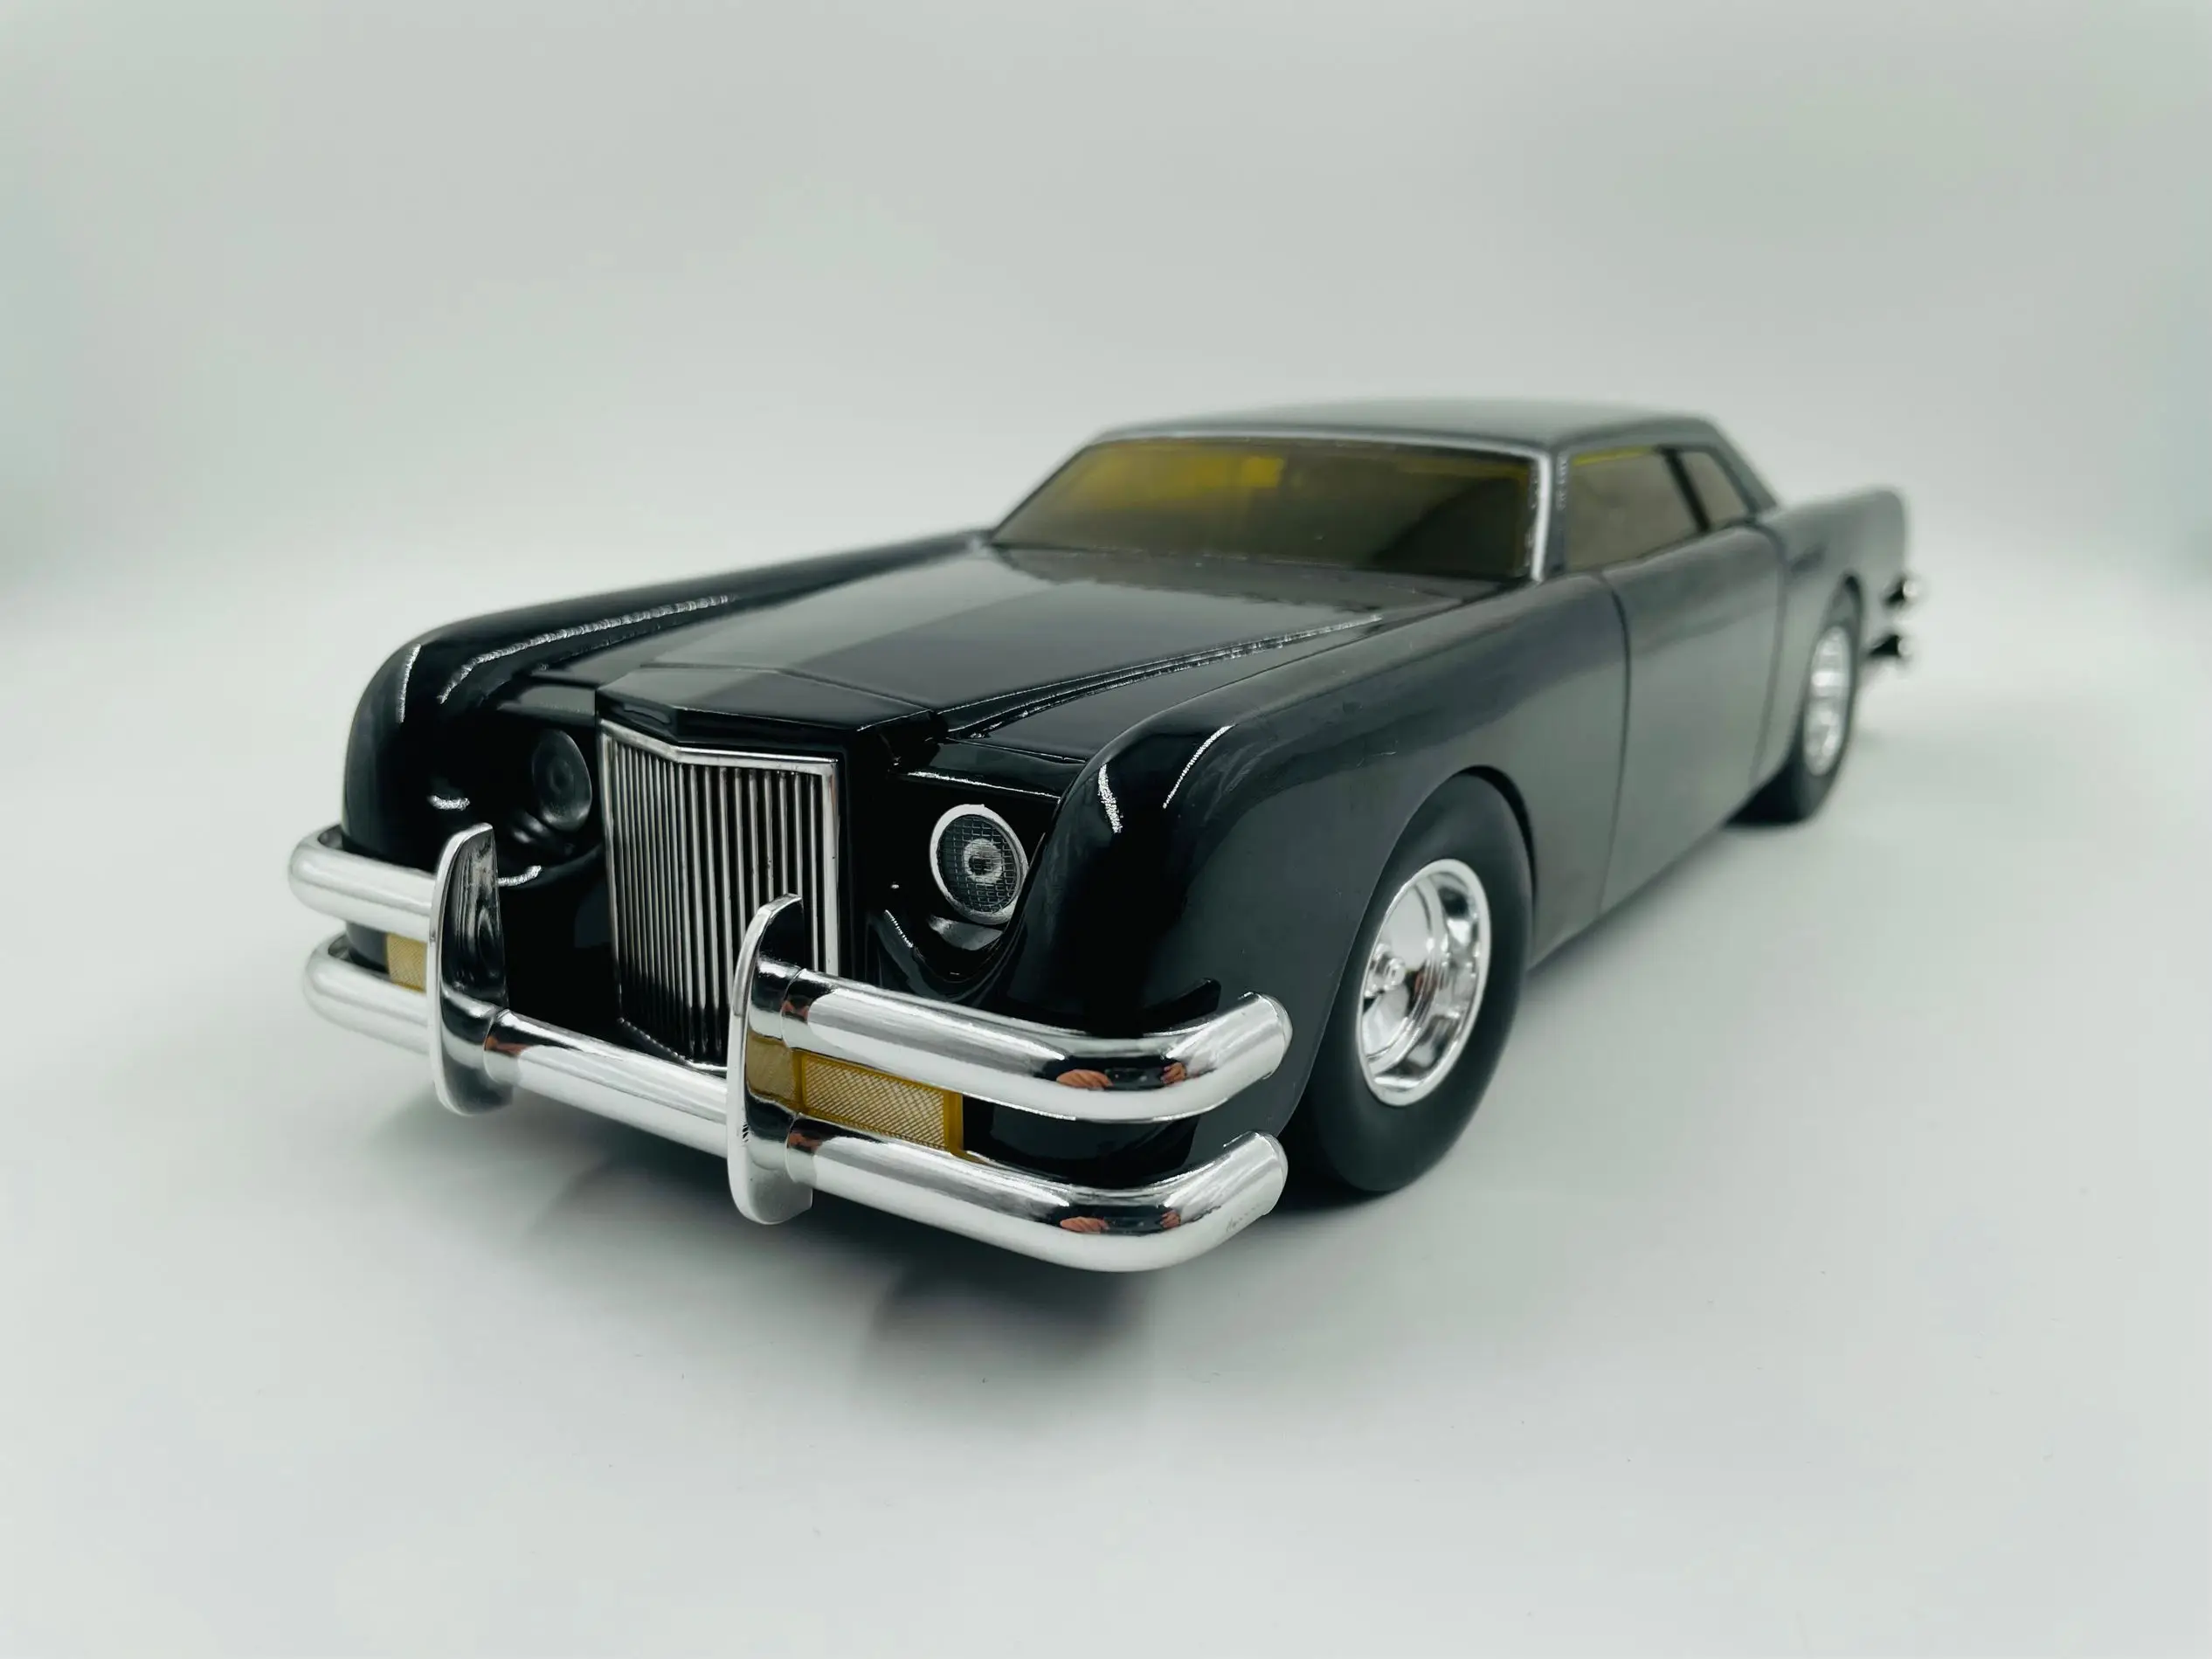 

AW 1:18 Lincoln George Barris Movie Version Alloy Fully Open Limited Edition Metal Static Car Model Toy Gift